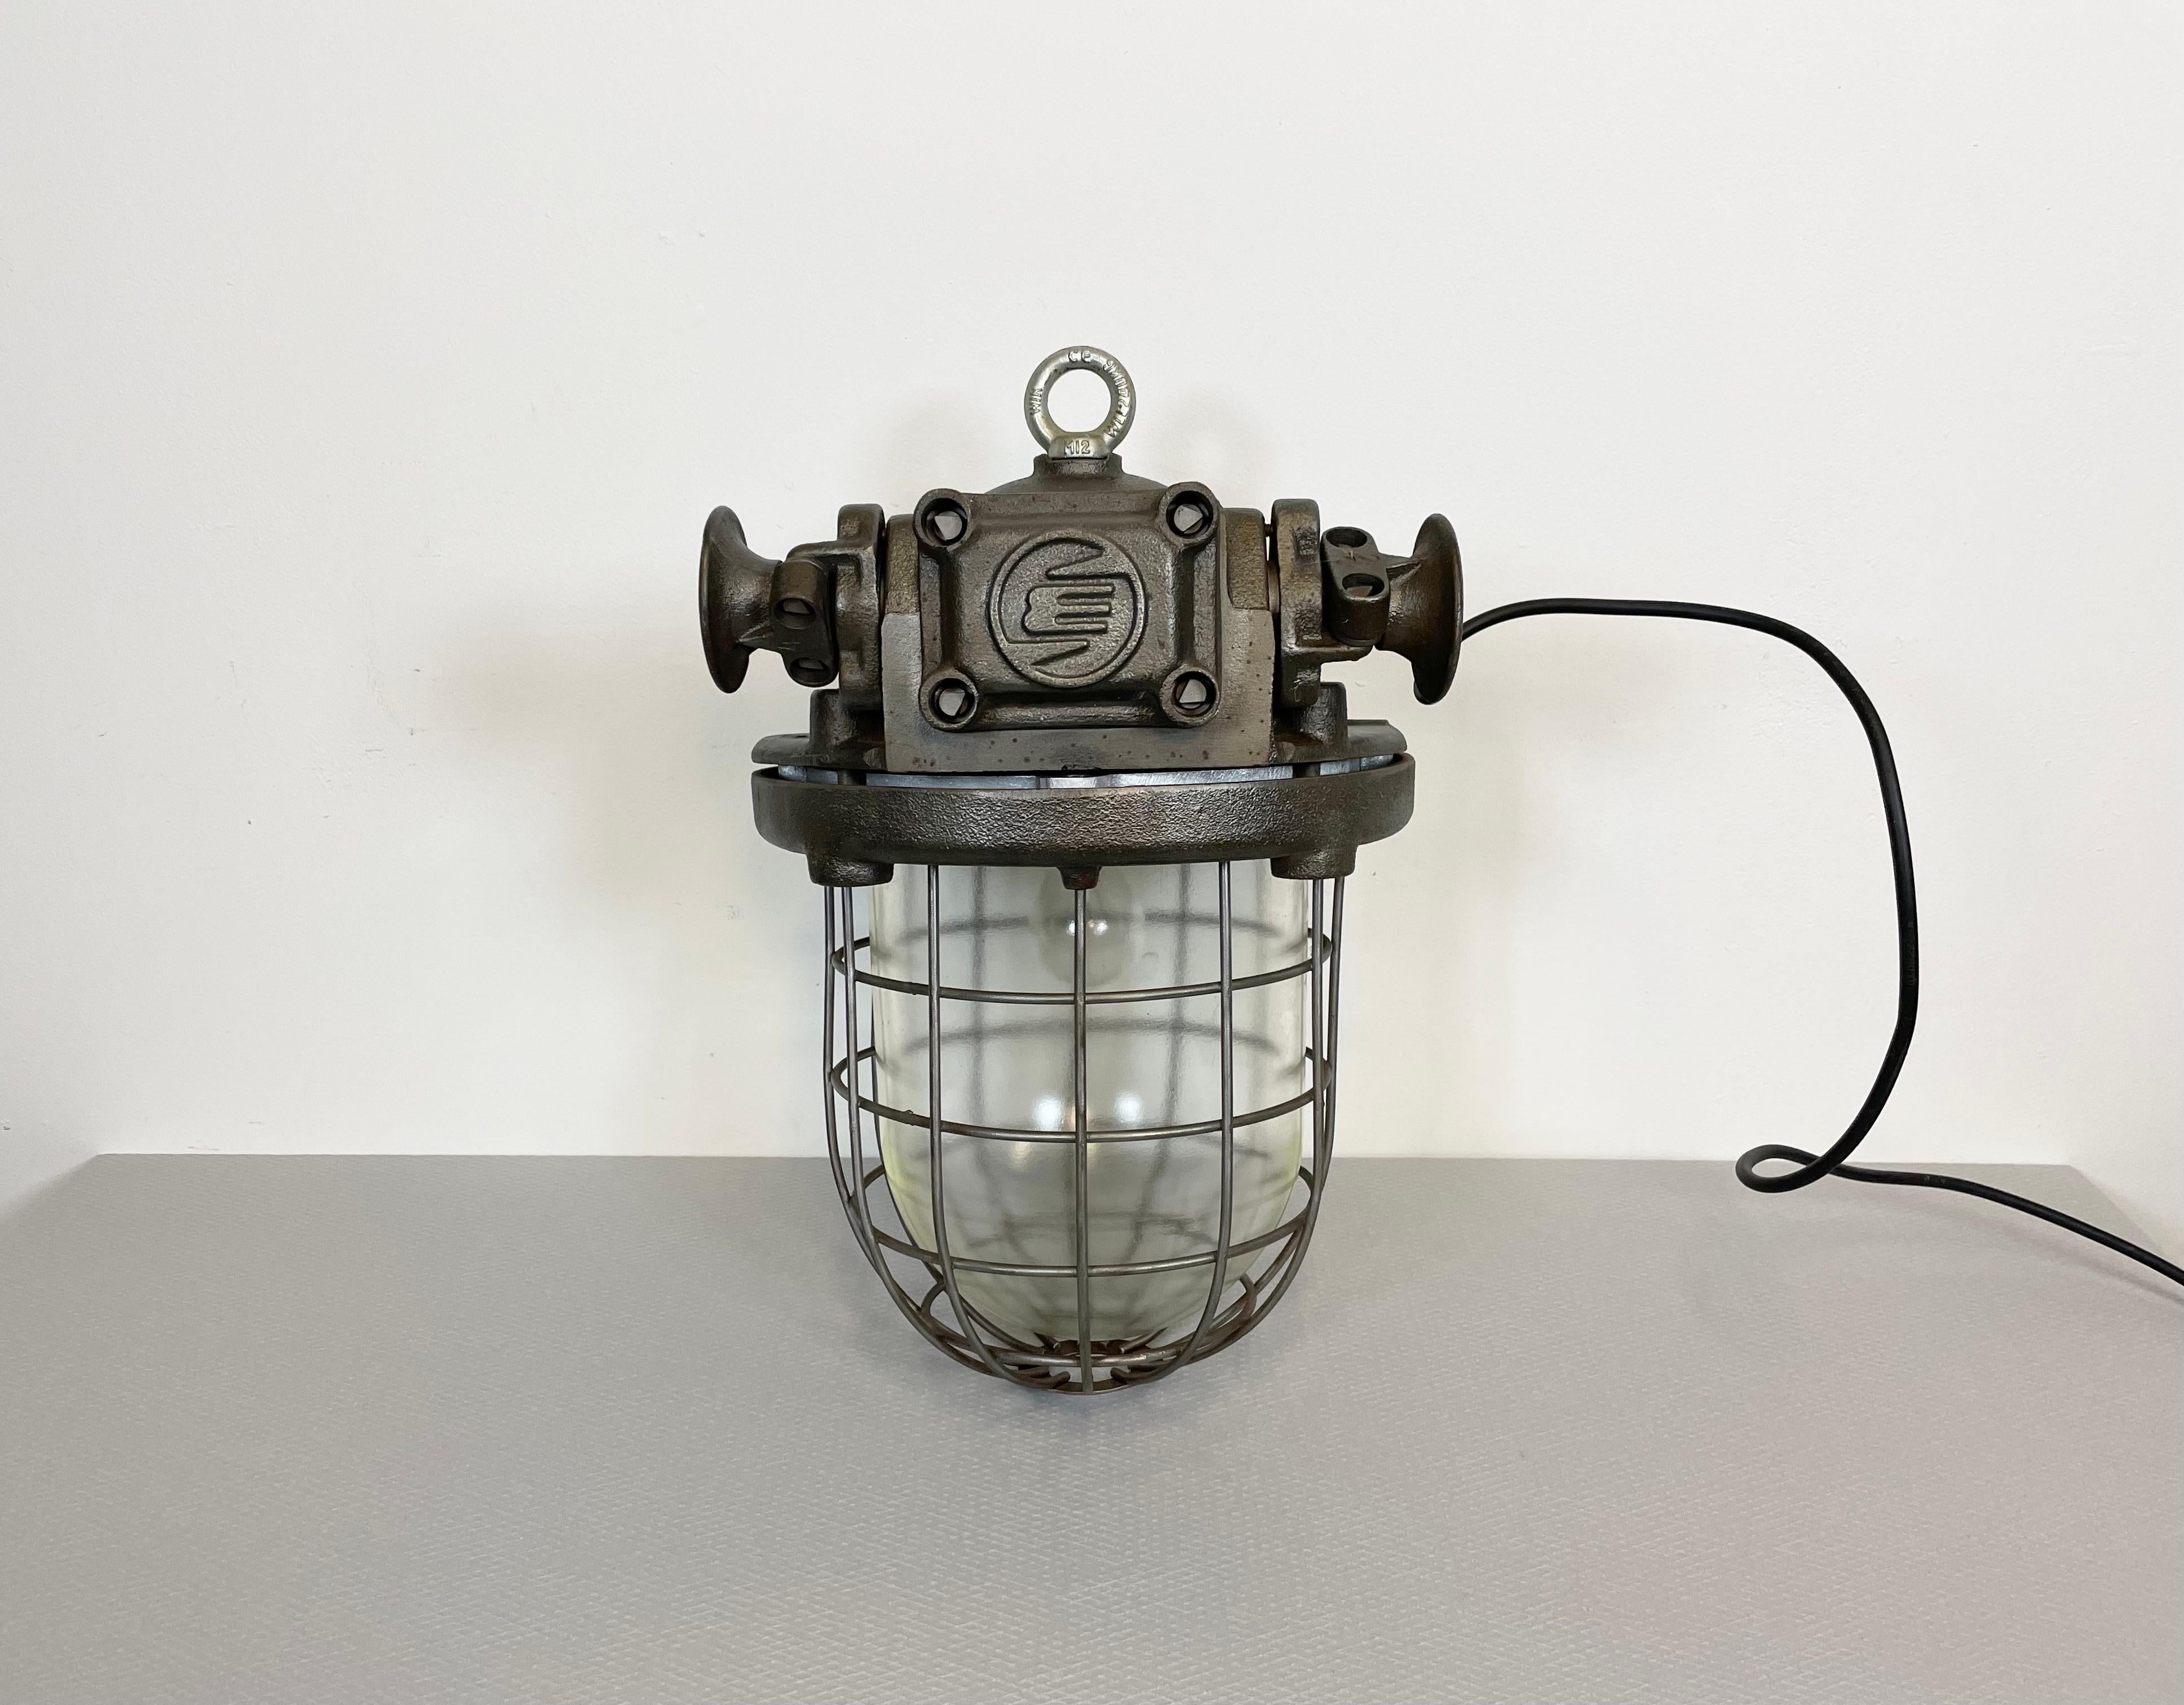 Large heavy industrial hanging lamp made by Elektrosvit in former Czechoslovakia during the 1960s. It features a cast iron body and a clear glass cover. The porcelain socket requires E 27 lightbulbs. New wire. The weight of the lamp is 27 kg !!!!